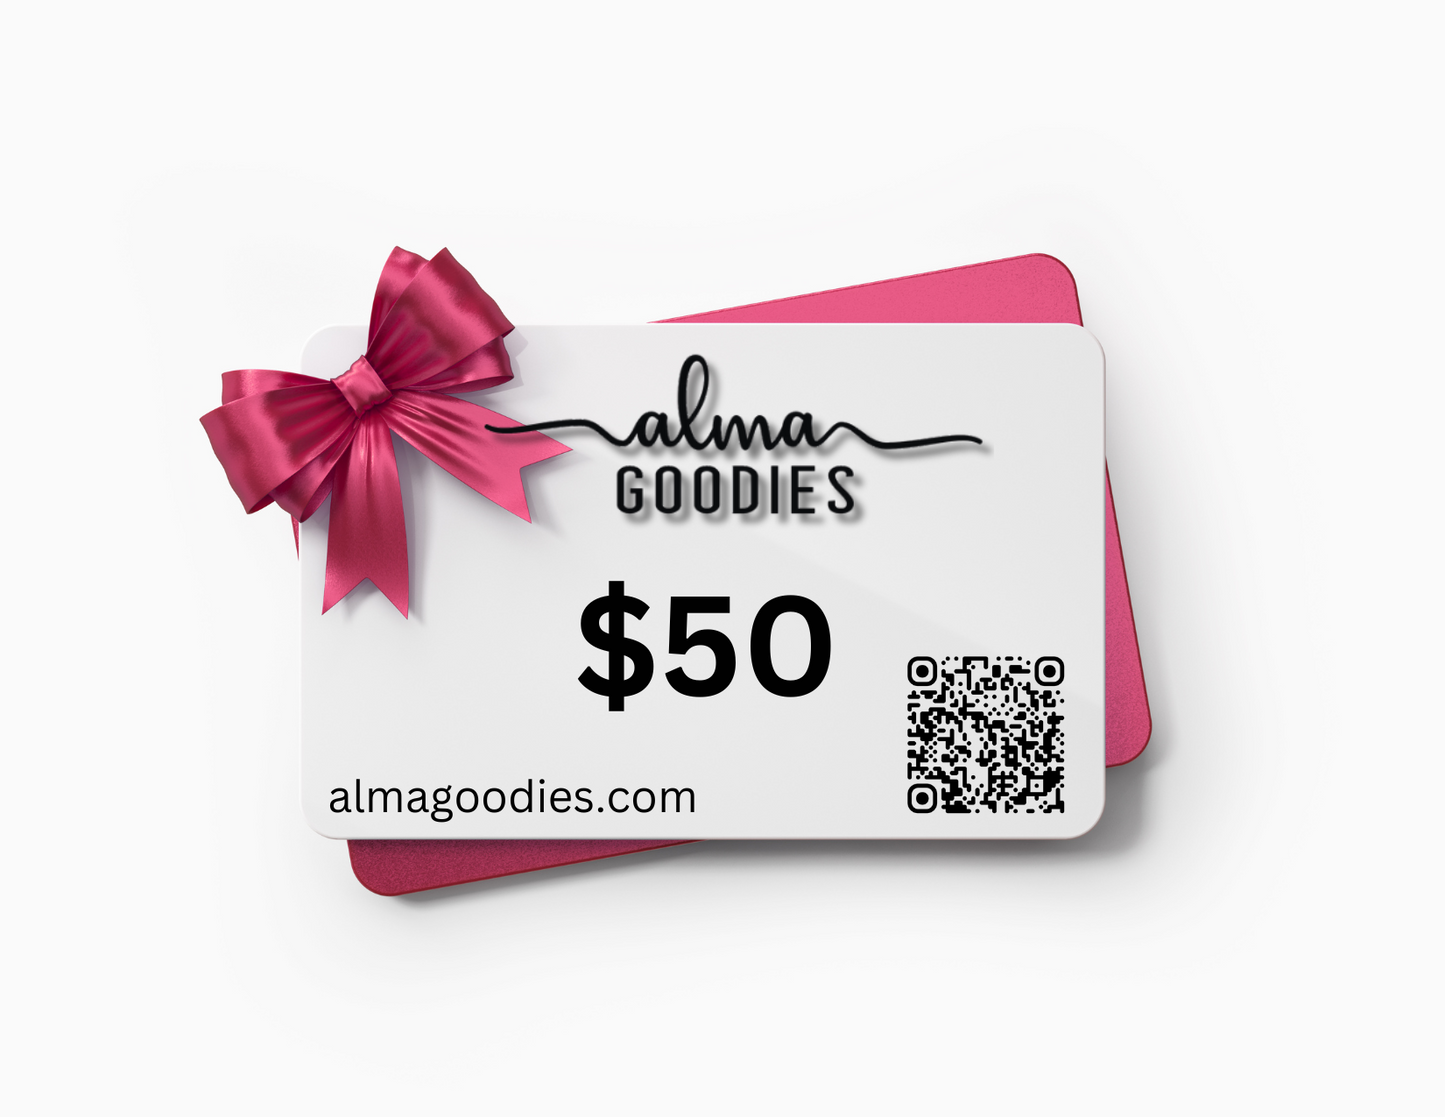 Alma Goodies Gift Card: The Perfect Gourmet Present